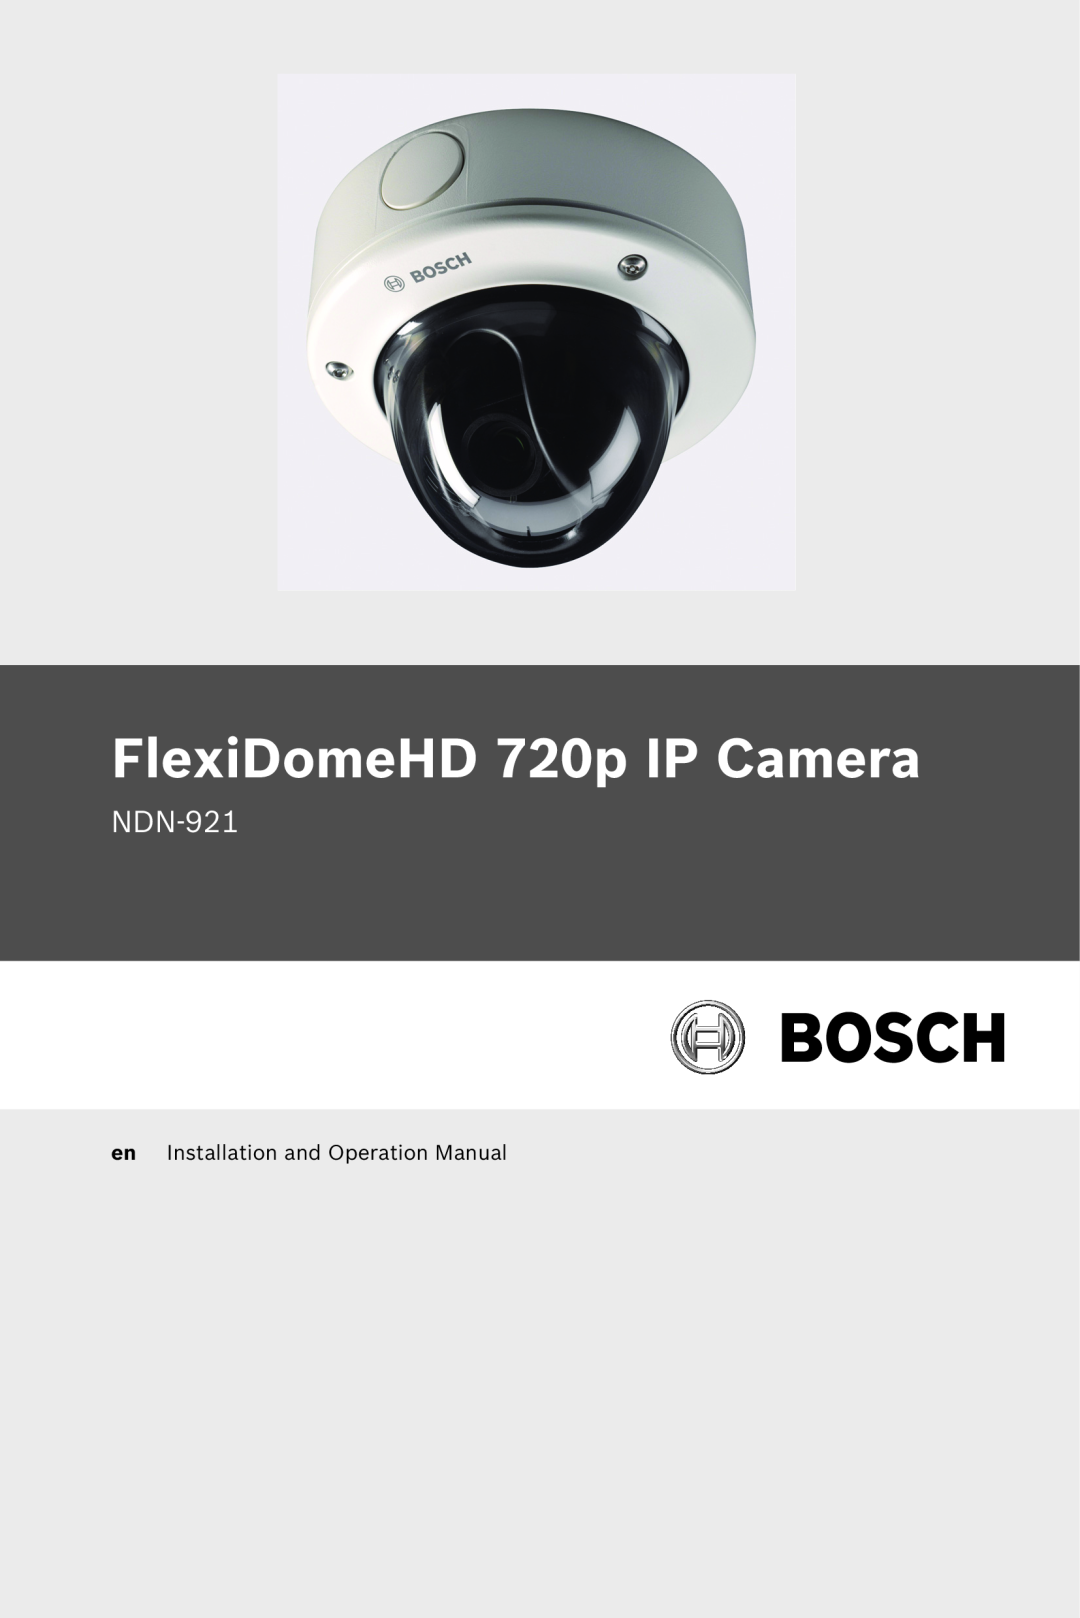 Bosch Appliances NDN-921 manual Functions, 720p HD Cameras, Superior image quality, Digital Image Processing 